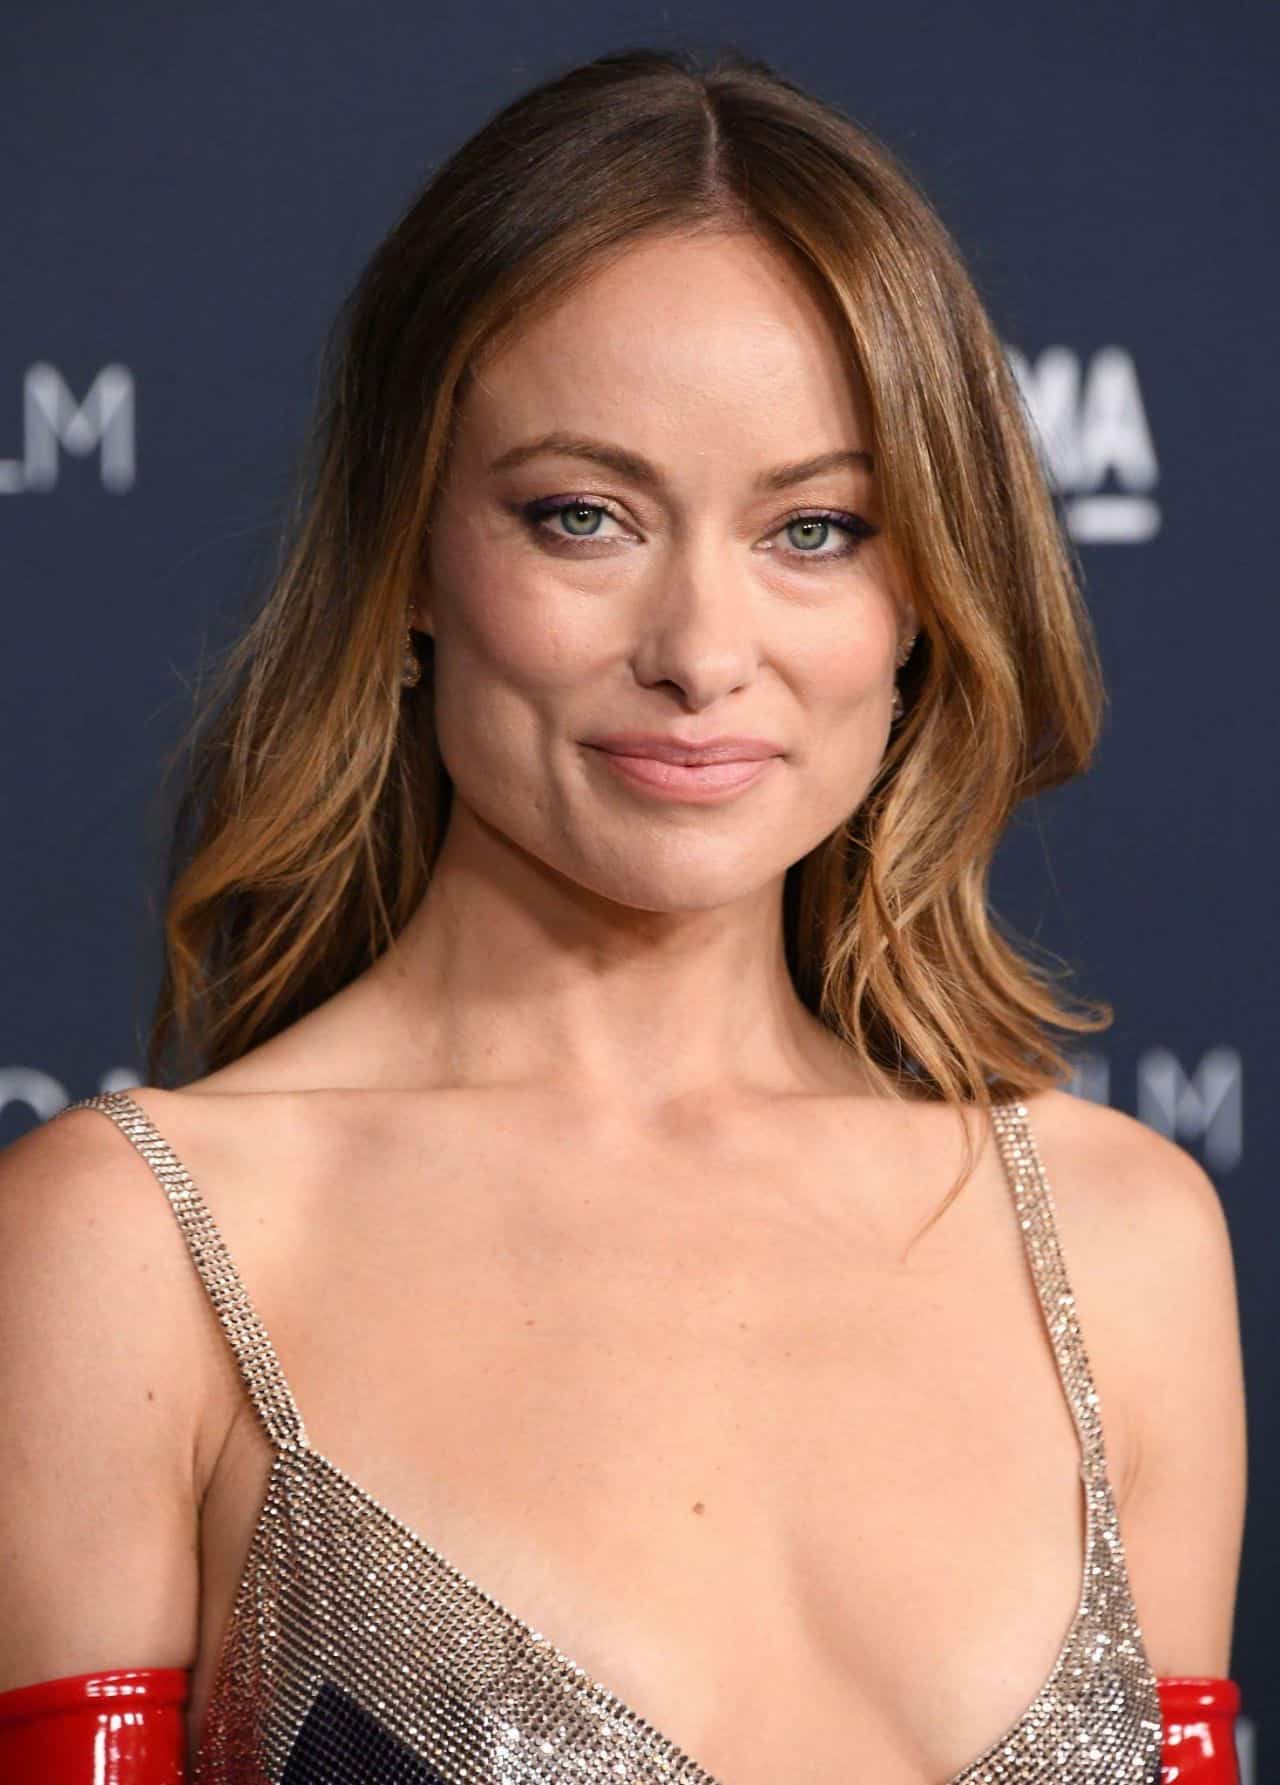 Olivia Wilde Dazzles in a Striking Sequin Dress at the 2022 LACMA